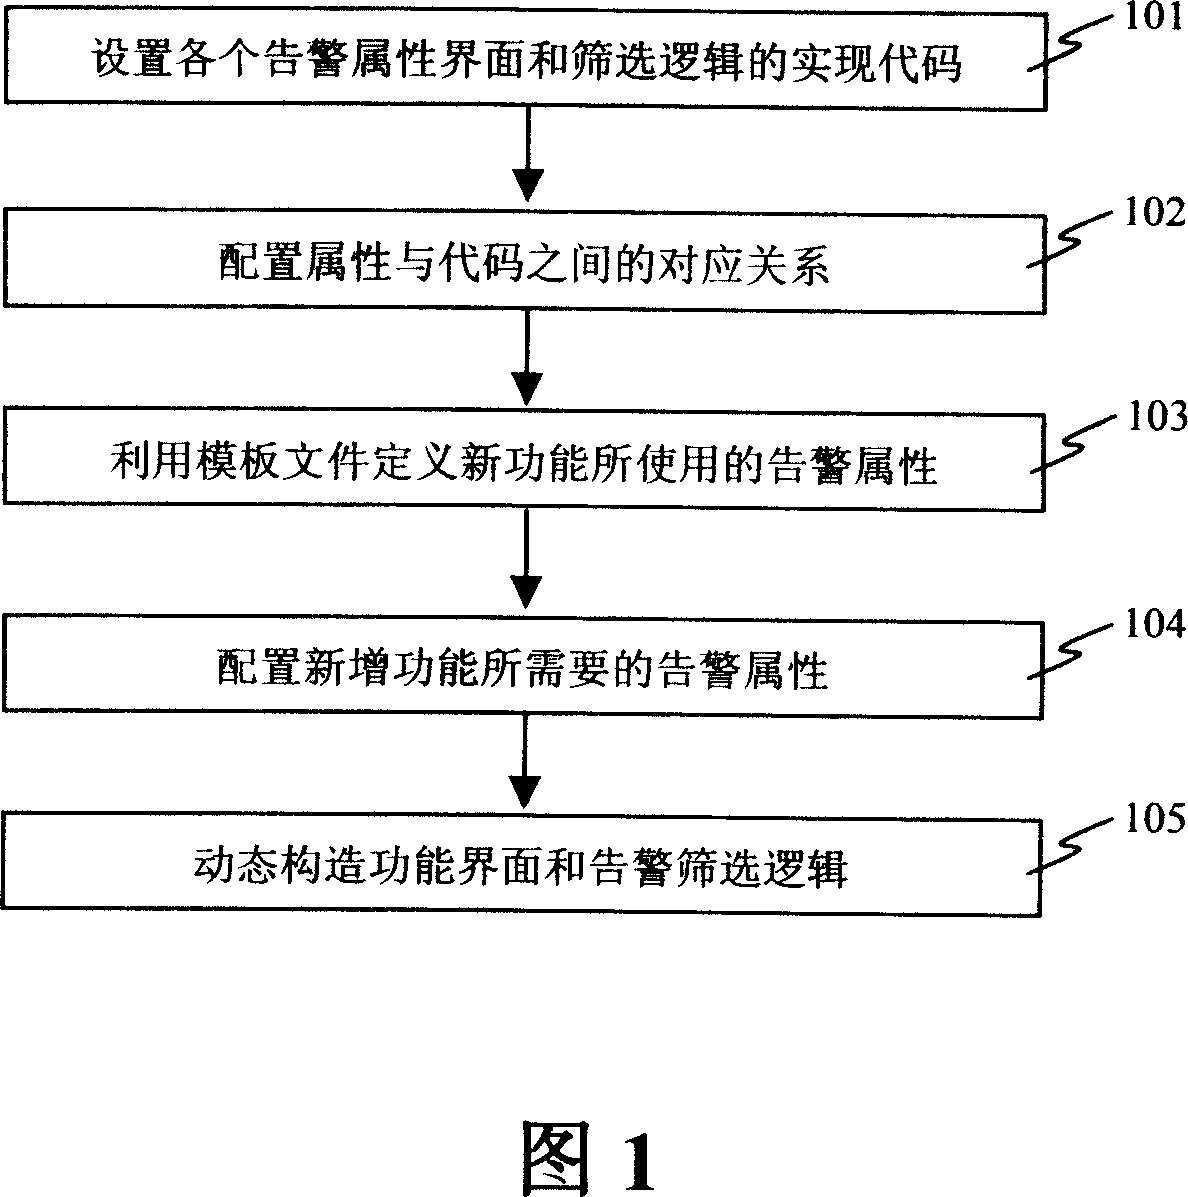 Filtration method for processing alarm rapidly